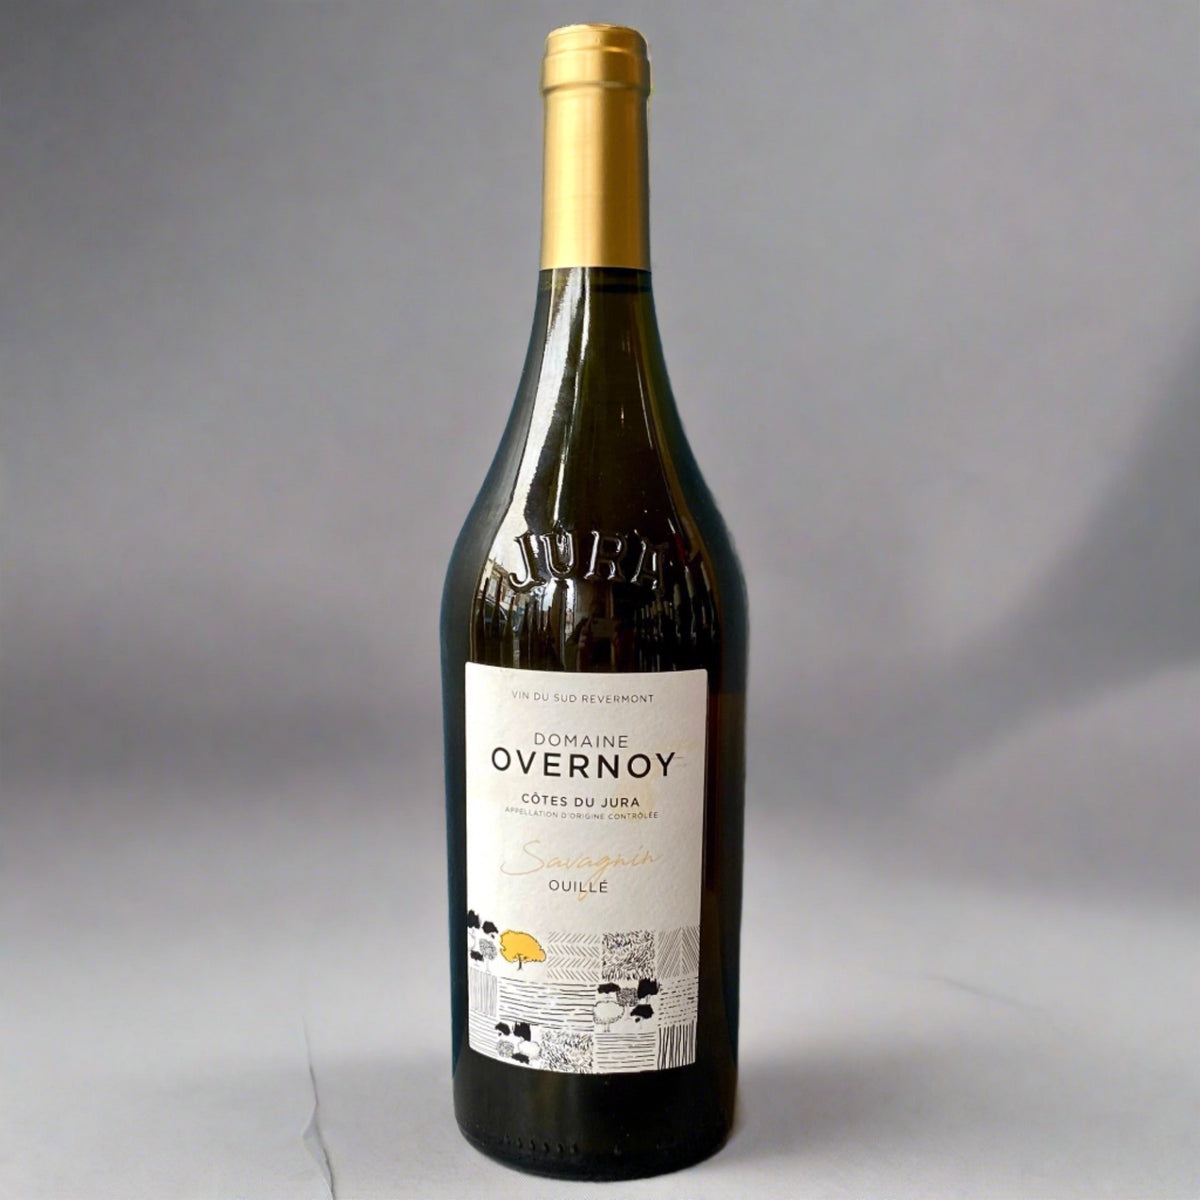 Domaine Overnoy, Savagnin Ouille